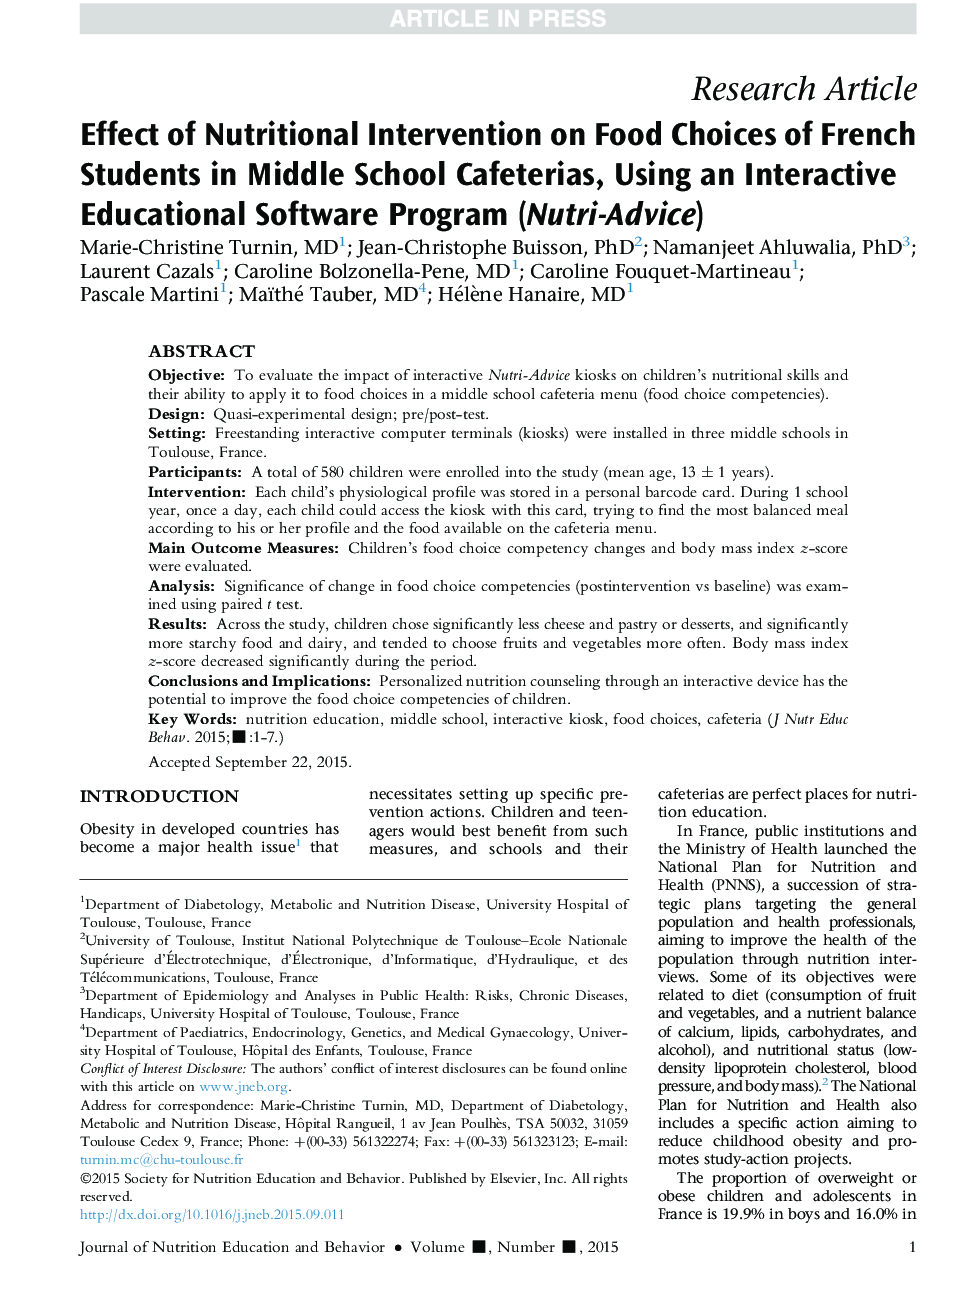 Effect of Nutritional Intervention on Food Choices of French Students in Middle School Cafeterias, Using an Interactive Educational Software Program (Nutri-Advice)